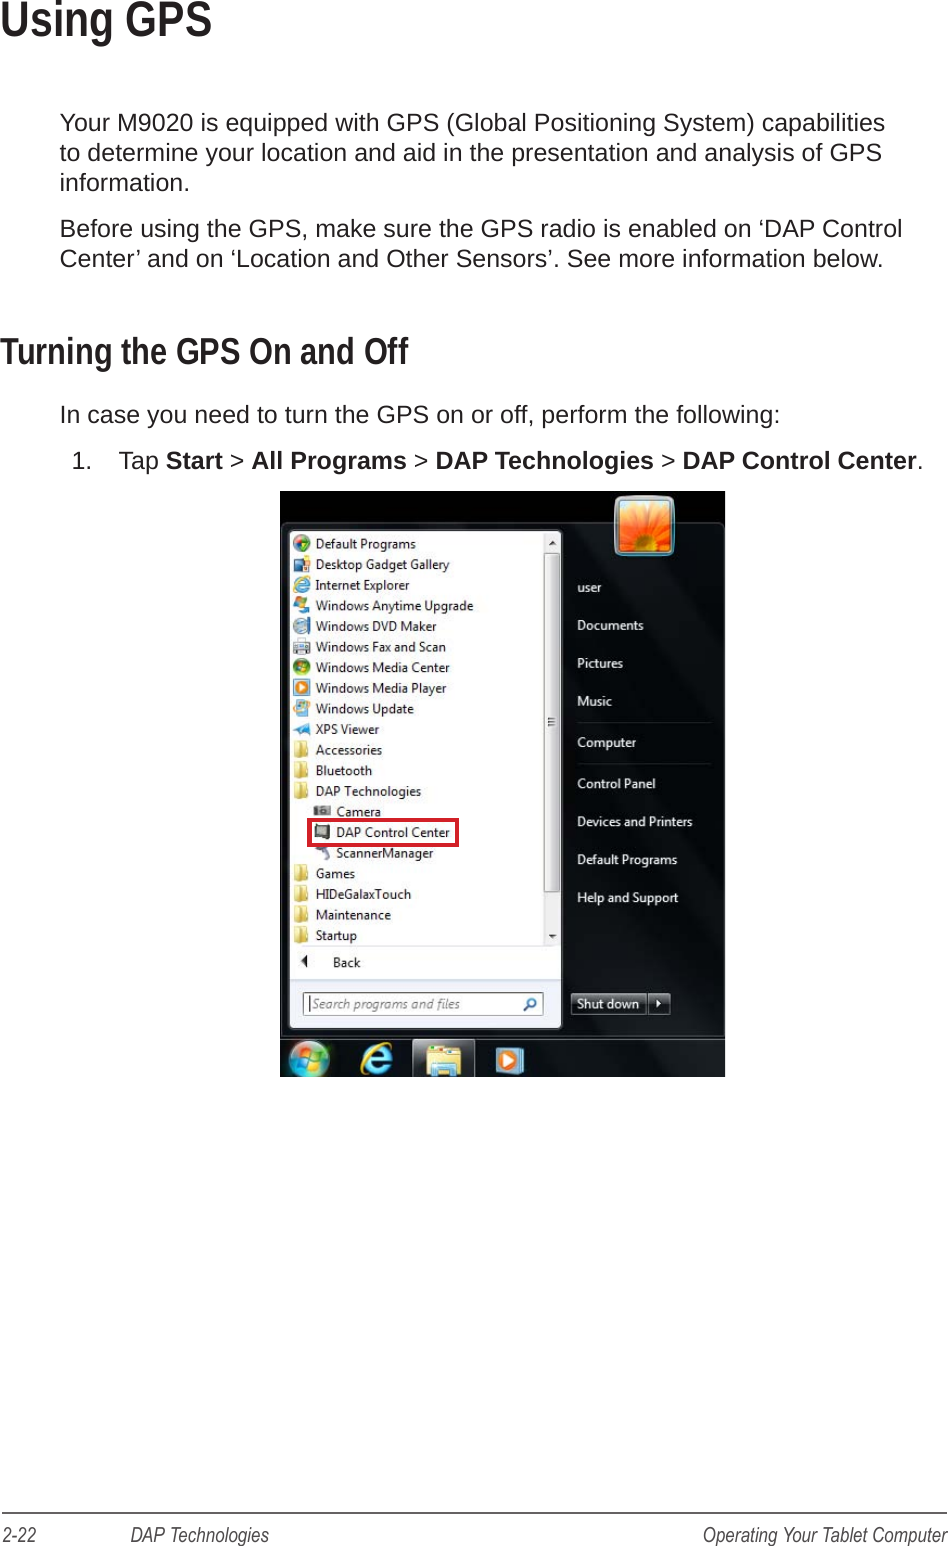 2-22                    DAP Technologies Operating Your Tablet ComputerUsing GPSYour M9020 is equipped with GPS (Global Positioning System) capabilities to determine your location and aid in the presentation and analysis of GPS information.Before using the GPS, make sure the GPS radio is enabled on ‘DAP Control Center’ and on ‘Location and Other Sensors’. See more information below.Turning the GPS On and OffIn case you need to turn the GPS on or off, perform the following:1.  Tap Start &gt; All Programs &gt; DAP Technologies &gt; DAP Control Center.